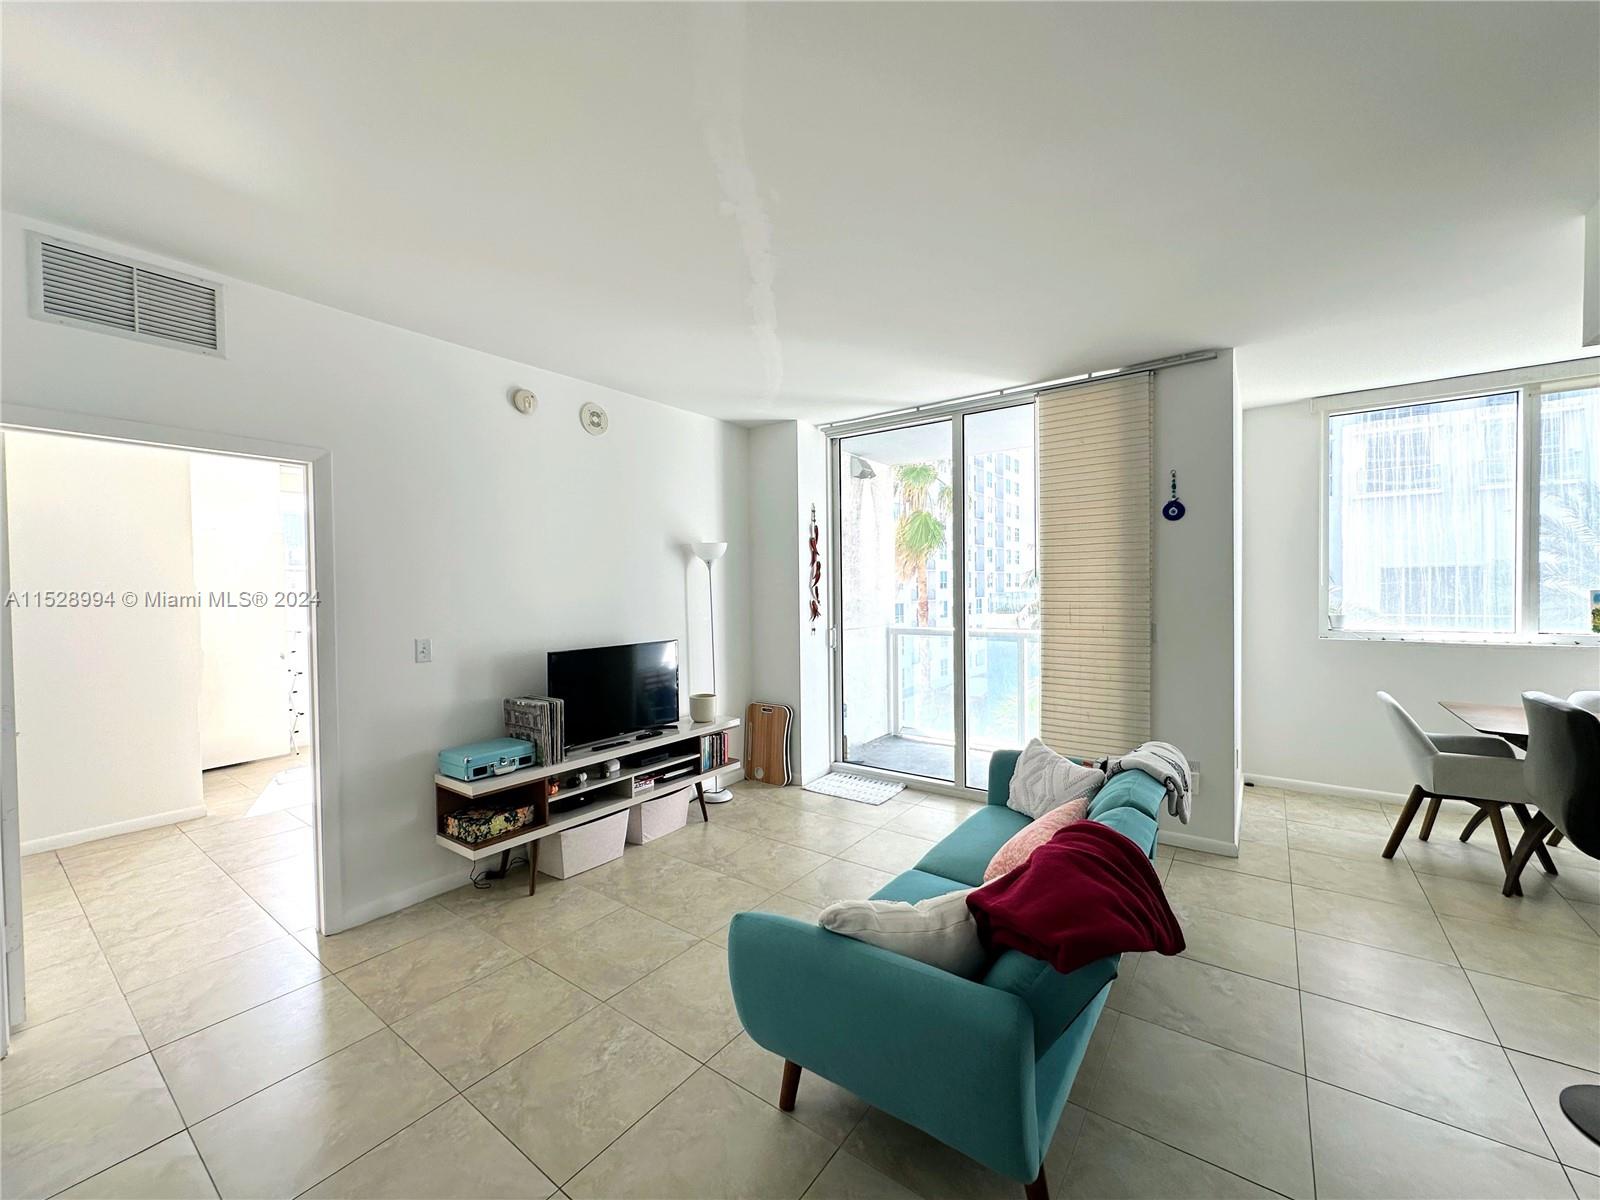 Corner Unit in the Heart of Downtown Miami! Spacious 1 BR + Converted Den/ 2 Full Baths.(approximately (1,146 sq ft) The den converted to a second bedroom. The kitchen has high-end Stainless Steel appliances & marble countertops. 2 Full bathrooms with marble floors, showers & glass doors. Ample walk-in closet. Full-size washer & dryer. Unit comes with 1 parking space and 1 storage unit. The condo offers 5-star resort-style amenities; 4 tropical pools, a jacuzzi, spa, gym & 24-hour lobby receptionists, and security.